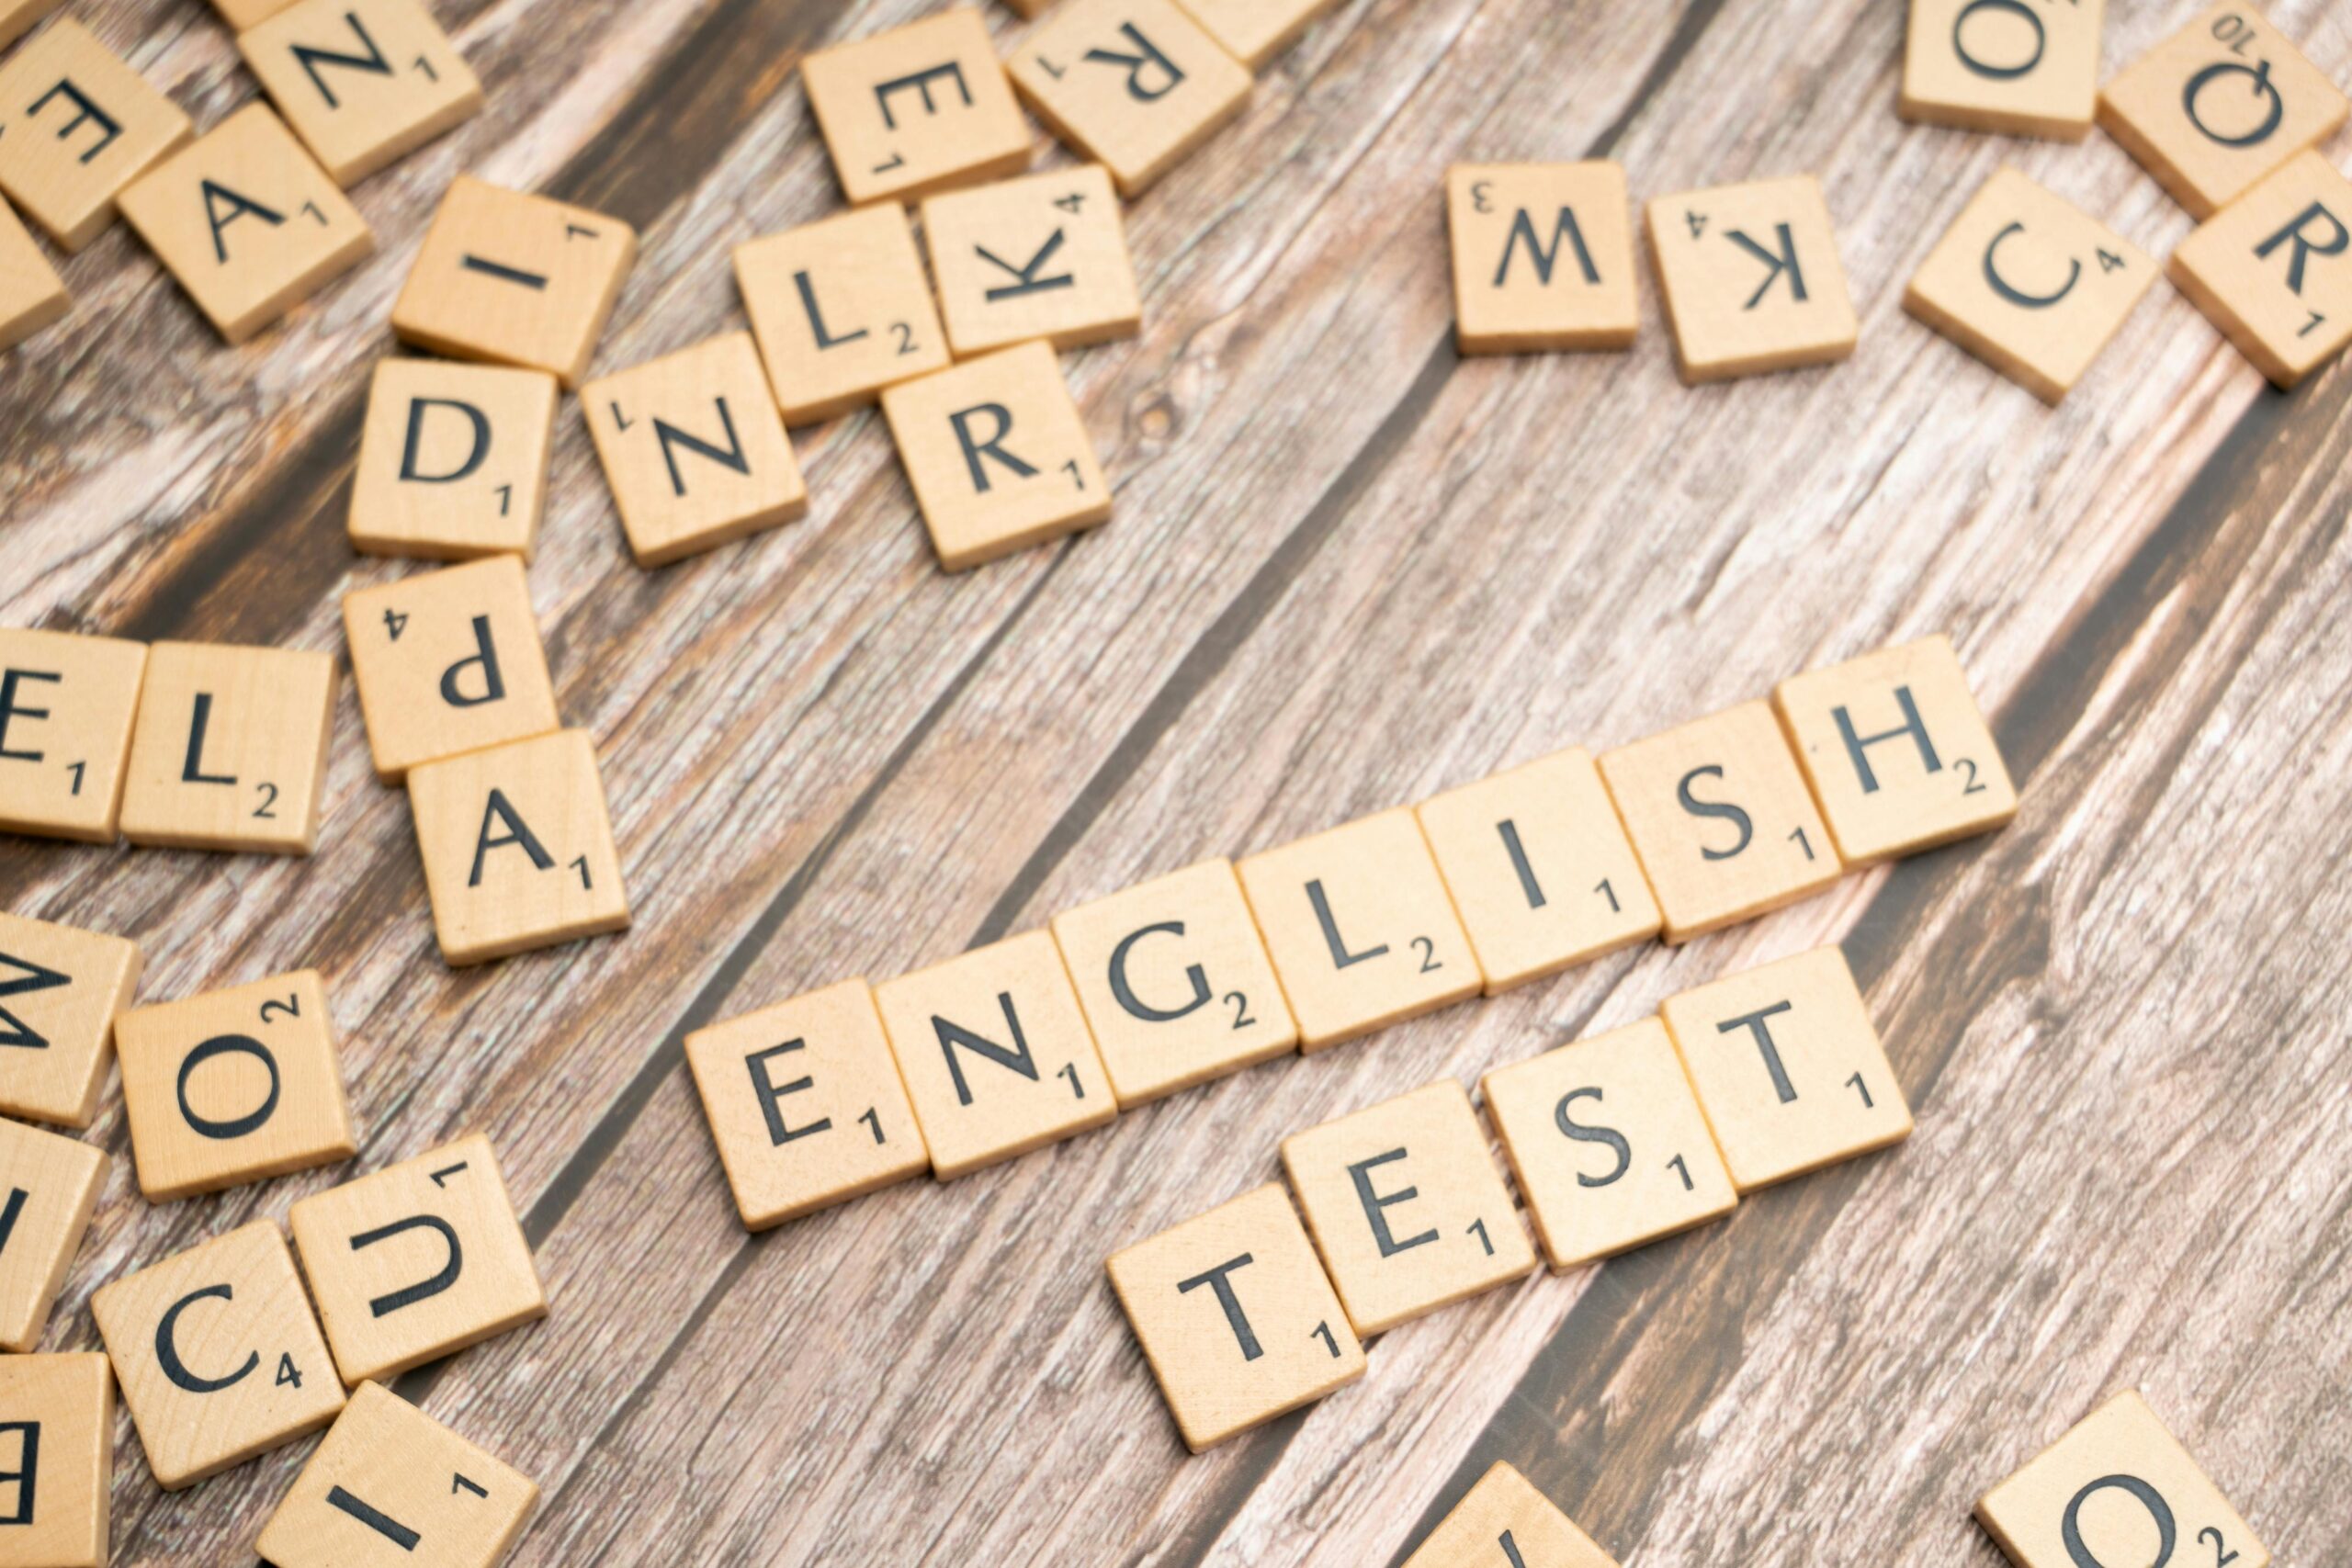 Mastering IELTS Training and TOEFL Preparation for Canada Immigration: A Guide for Pakistanis